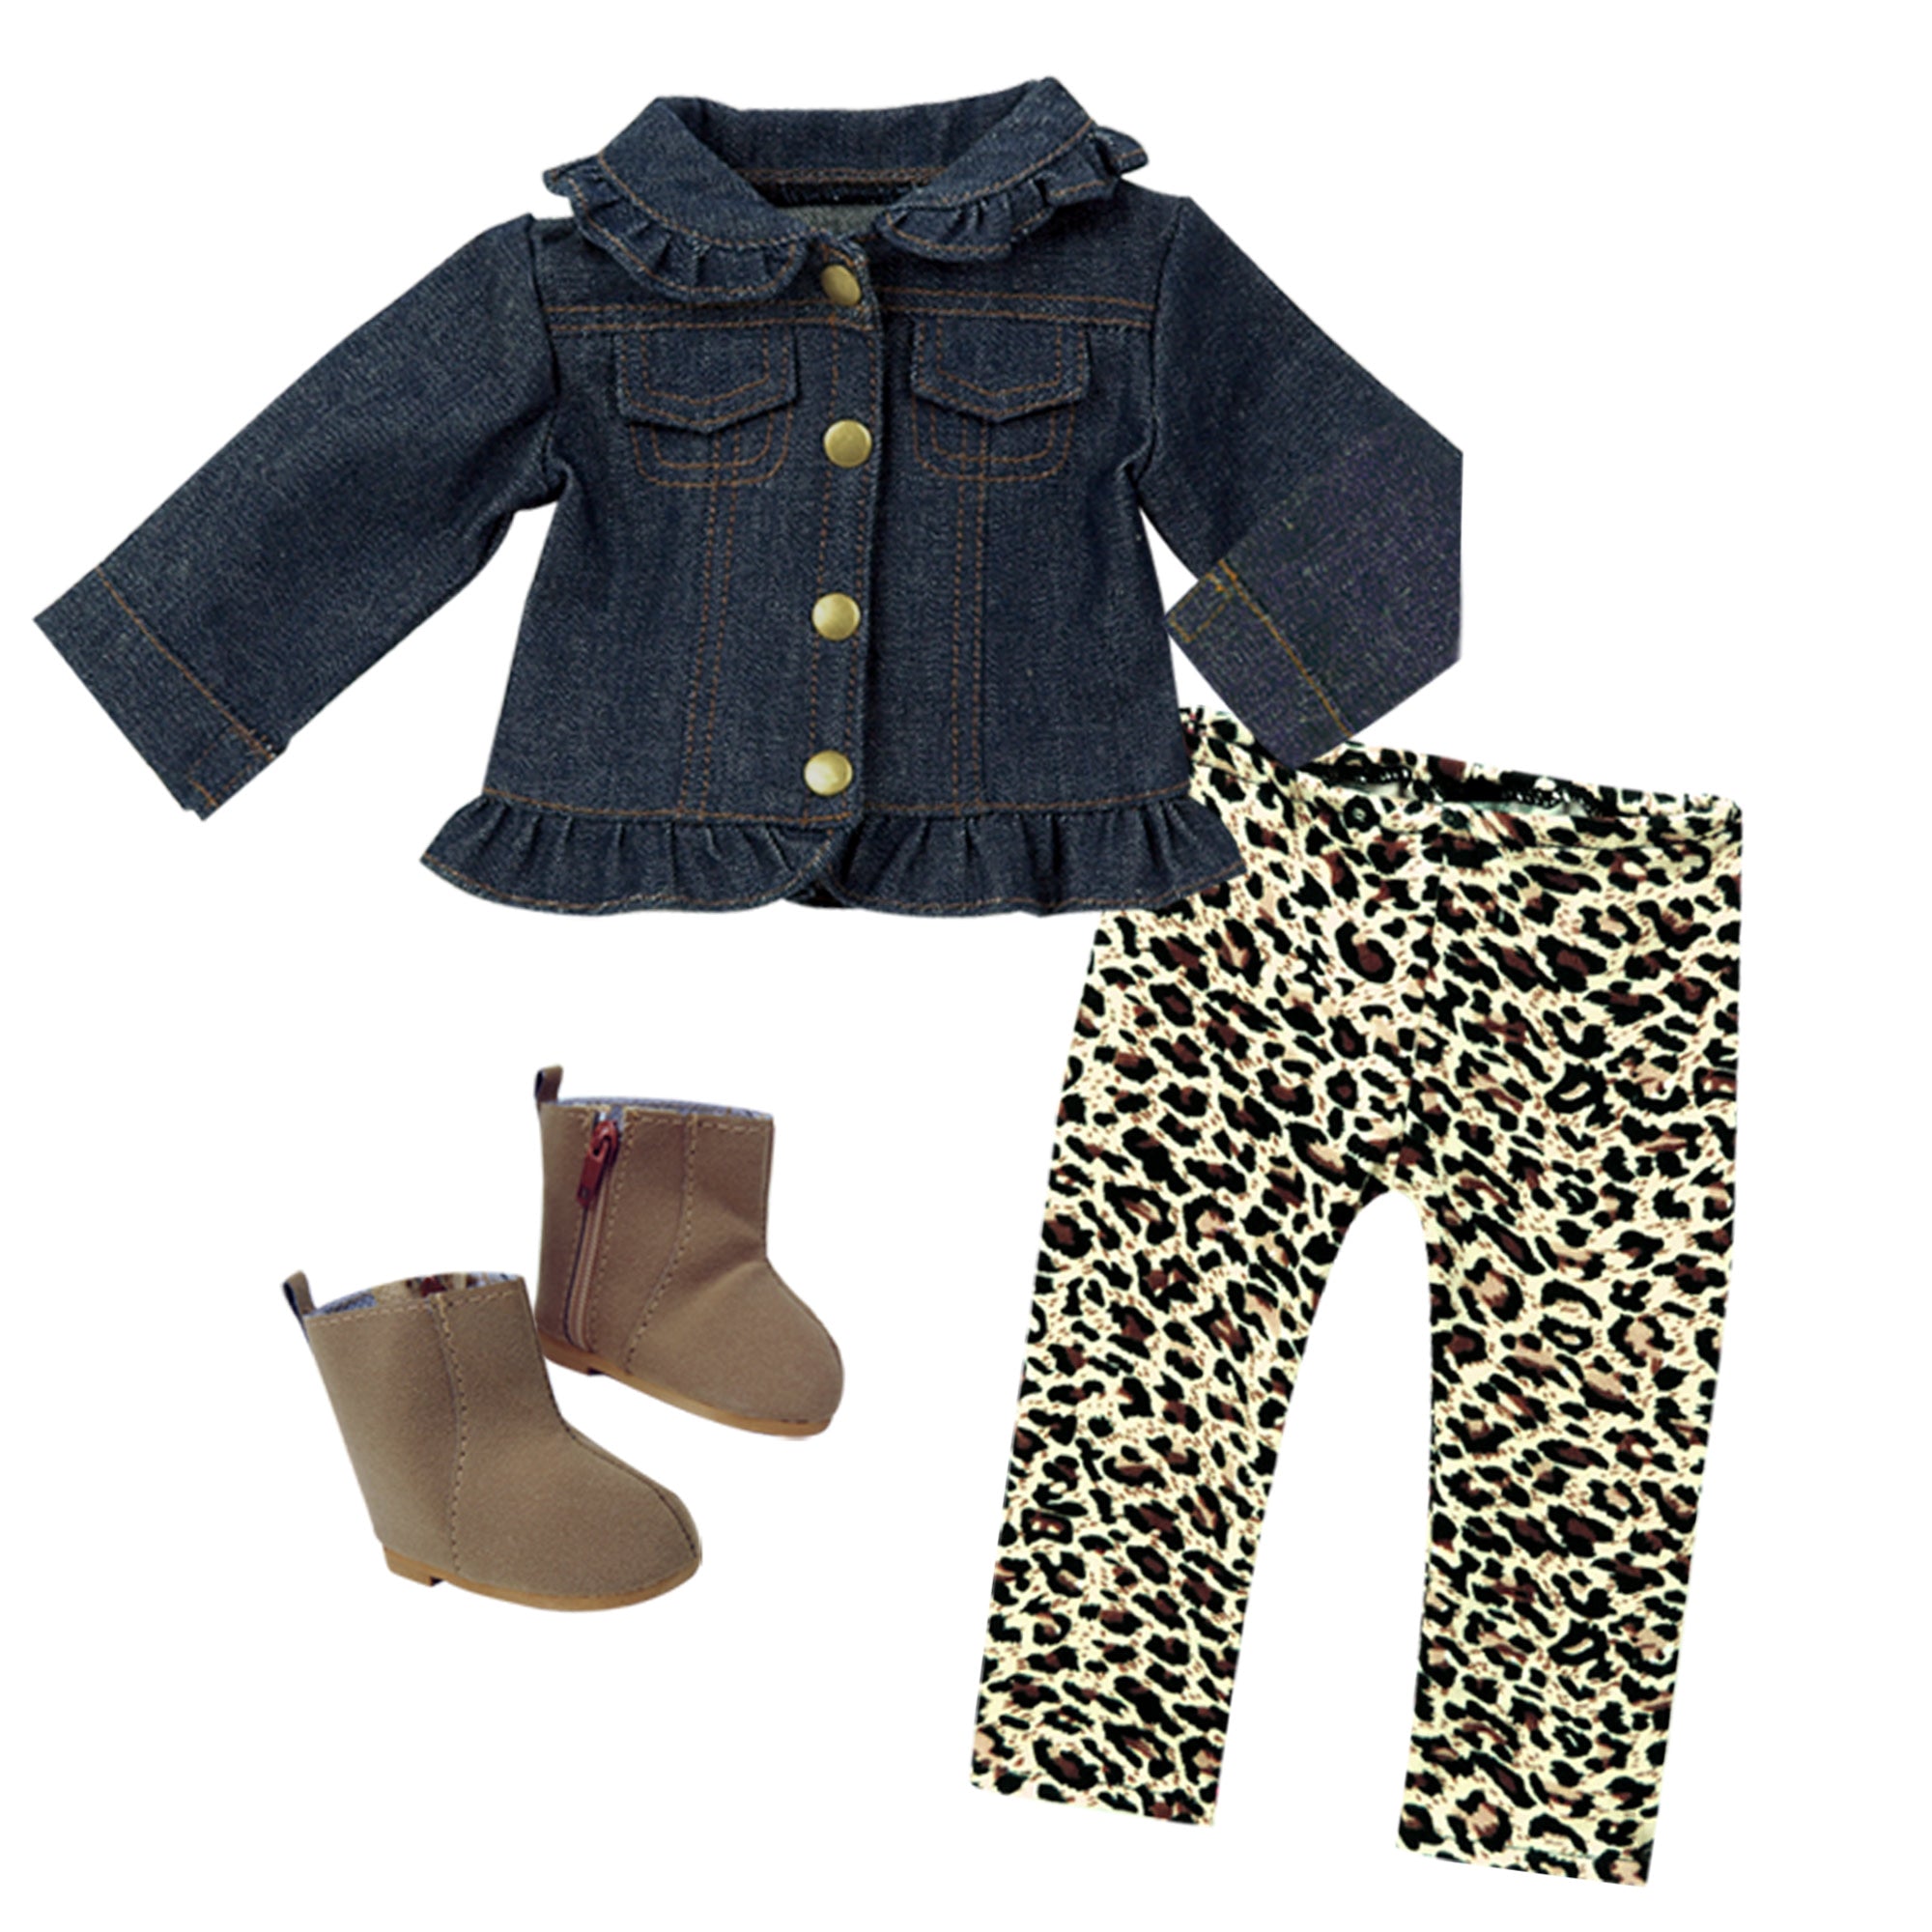 Sophia’s Jean Jacket, Leggings, and Boots Set for 18" Dolls